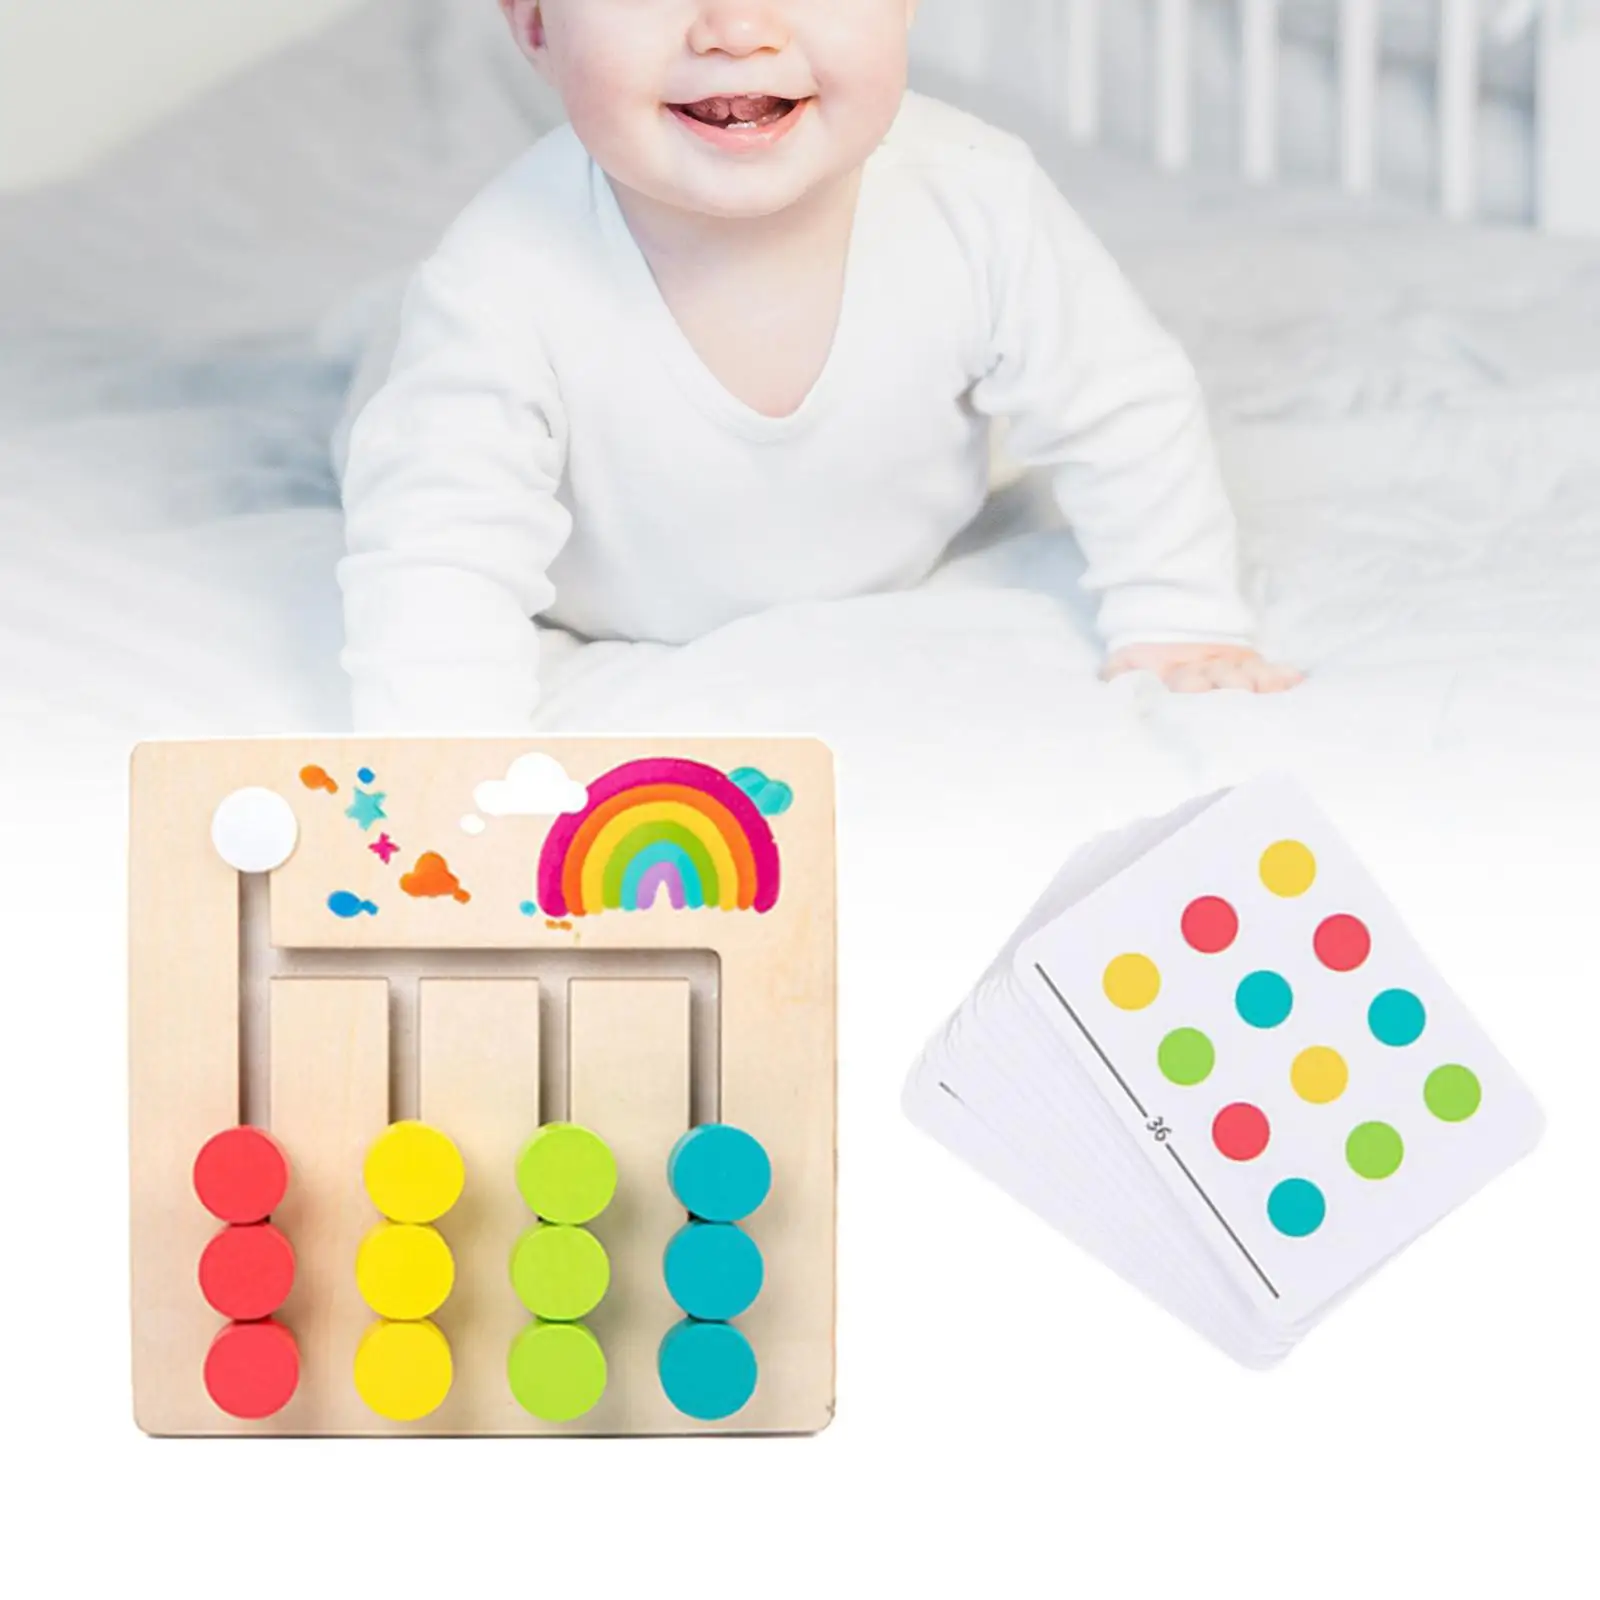 Montessori Toys Slide Puzzle Board Games Early Education Stem Toys Preschool Educational Toys for Child Toddler Birthday Gifts